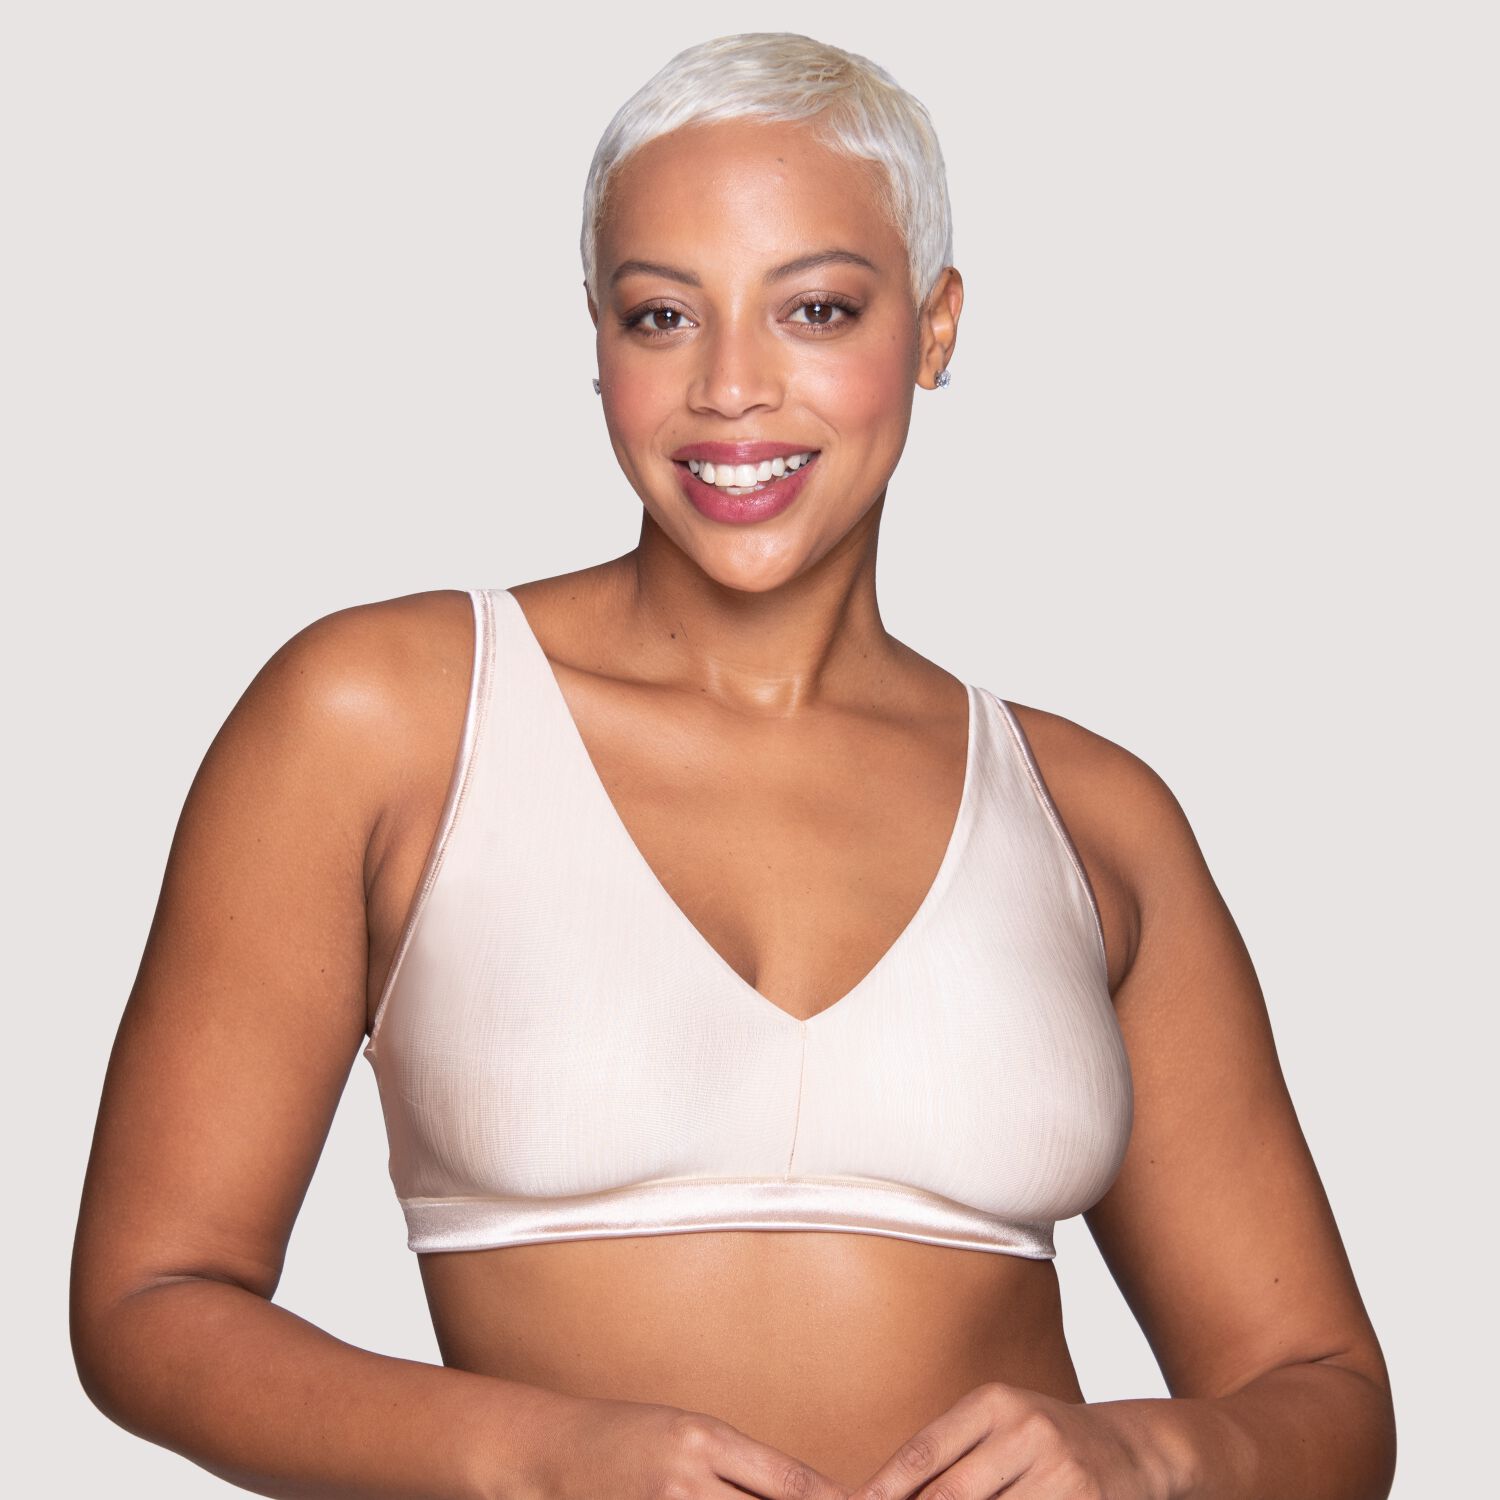 Tradie Lady Women's Active Convertible Bralette - Twilight - Size 8-10